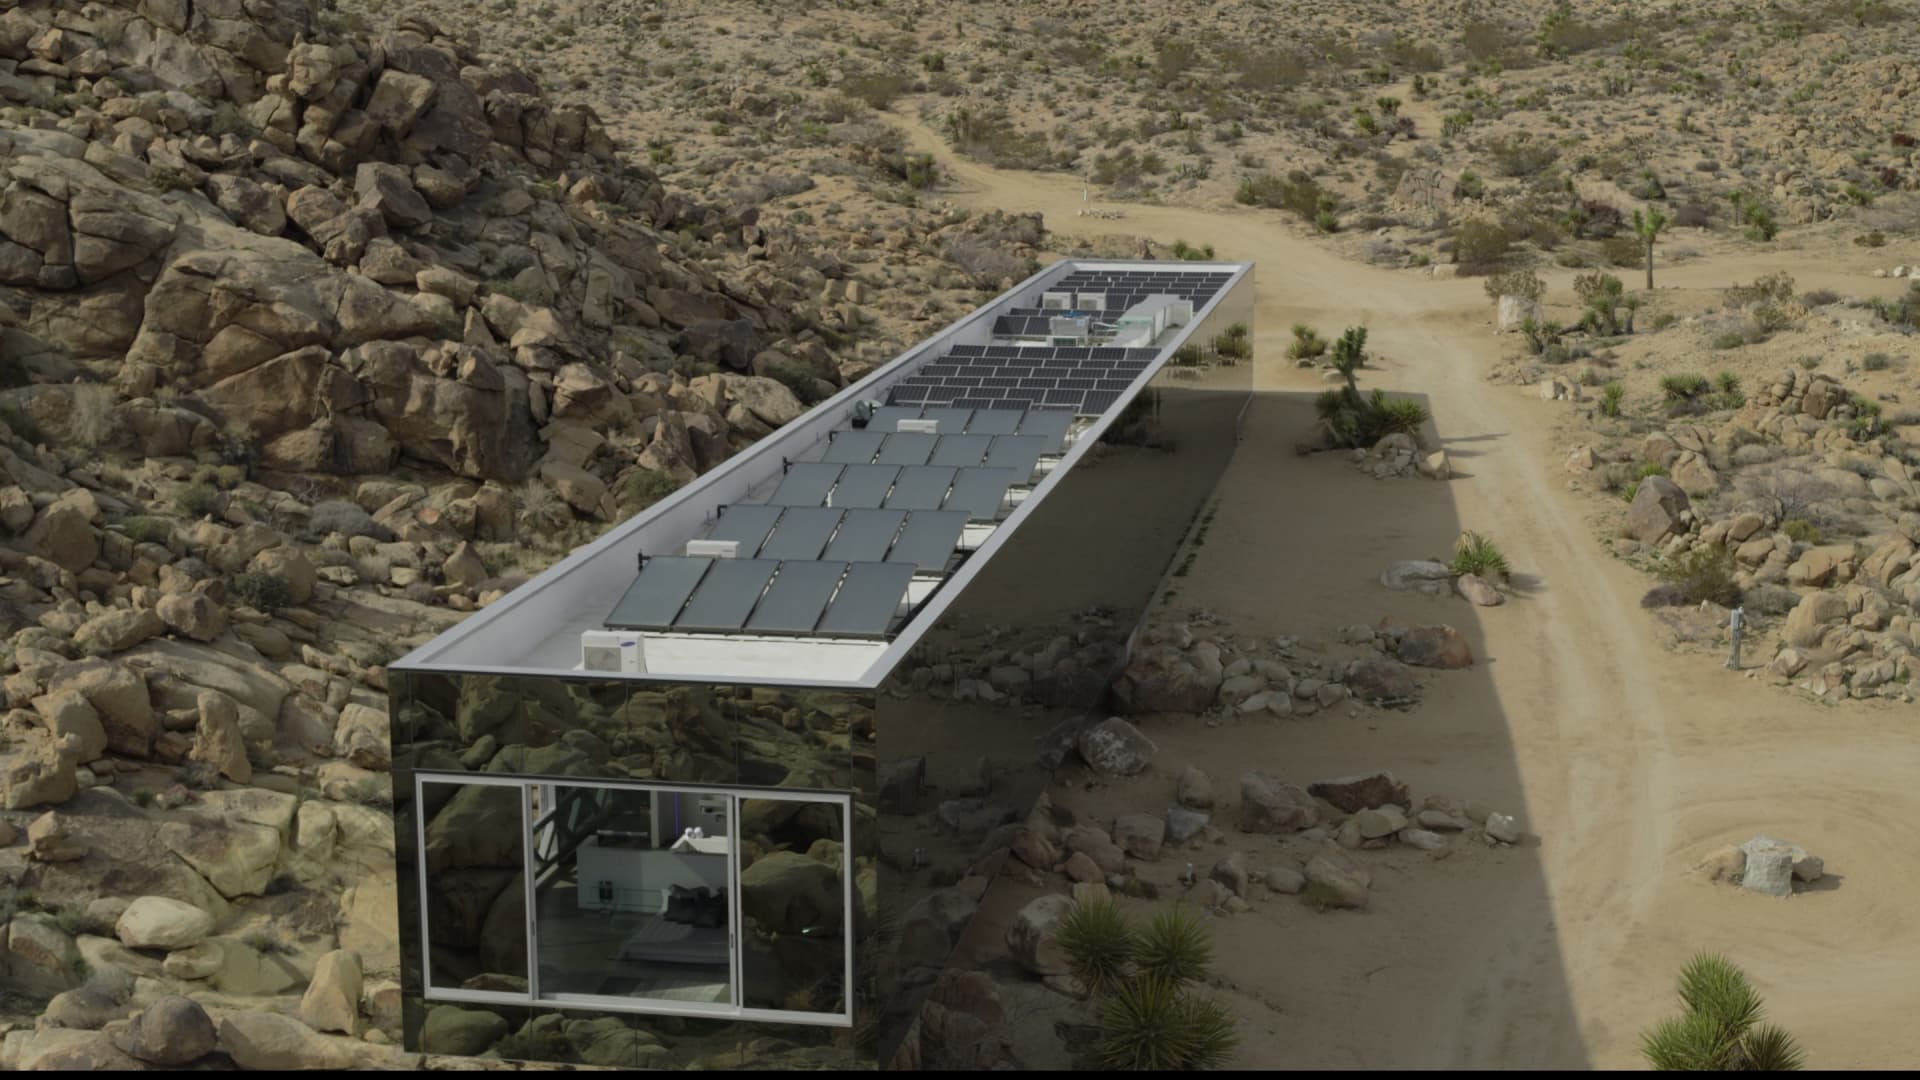 The rooftop of the Invisible House is equipped with an array of solar panels that supply the home with electricity, heat and hot water.